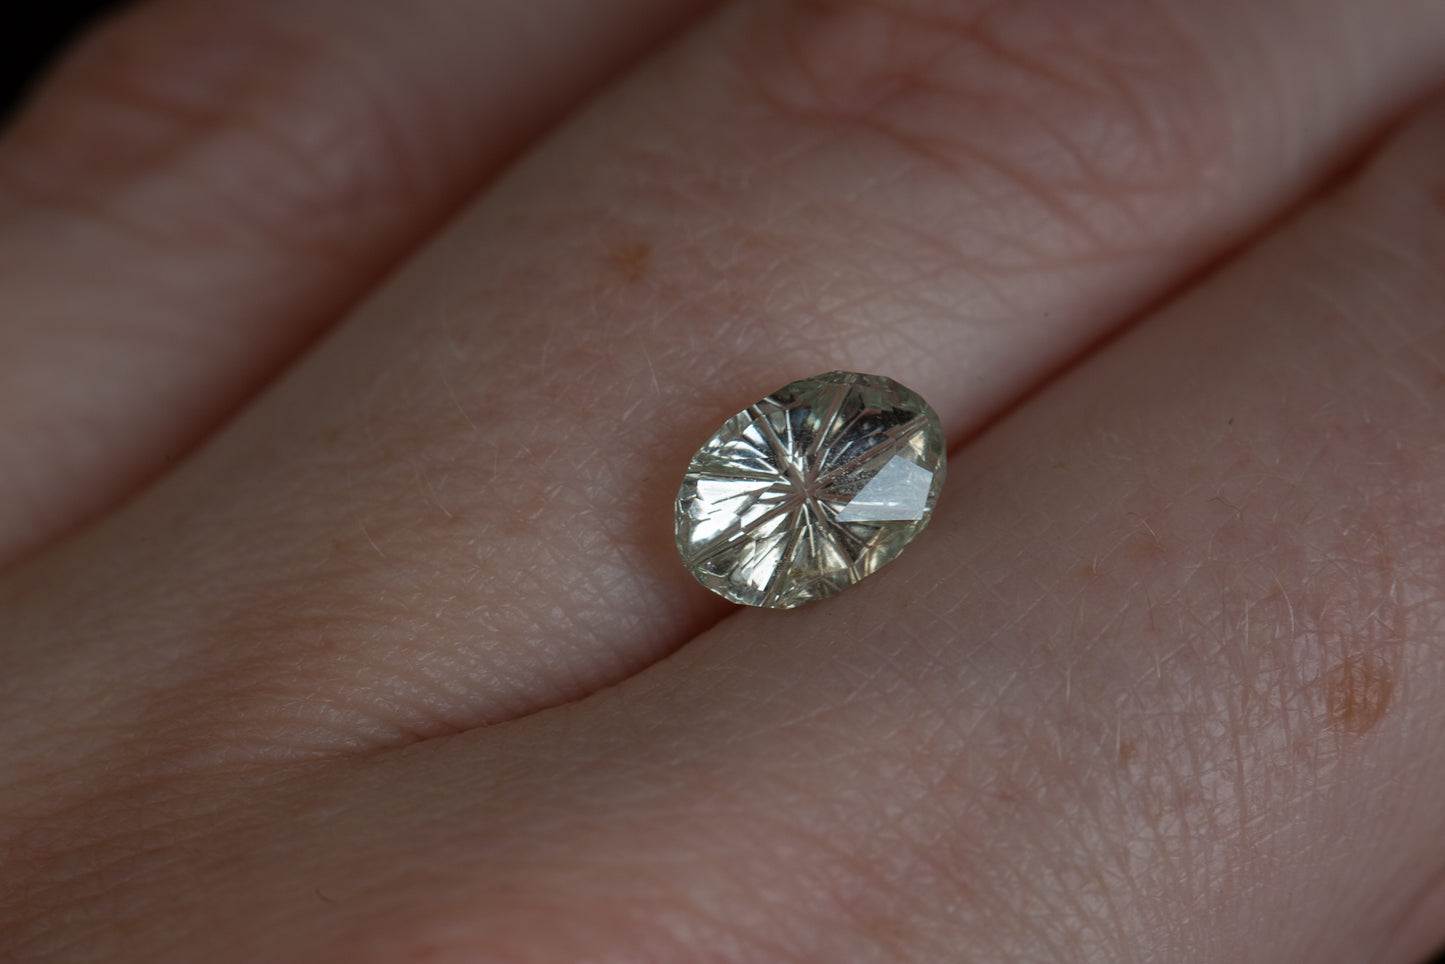 1.89ct oval white sapphire - Starbrite cut by John Dyer